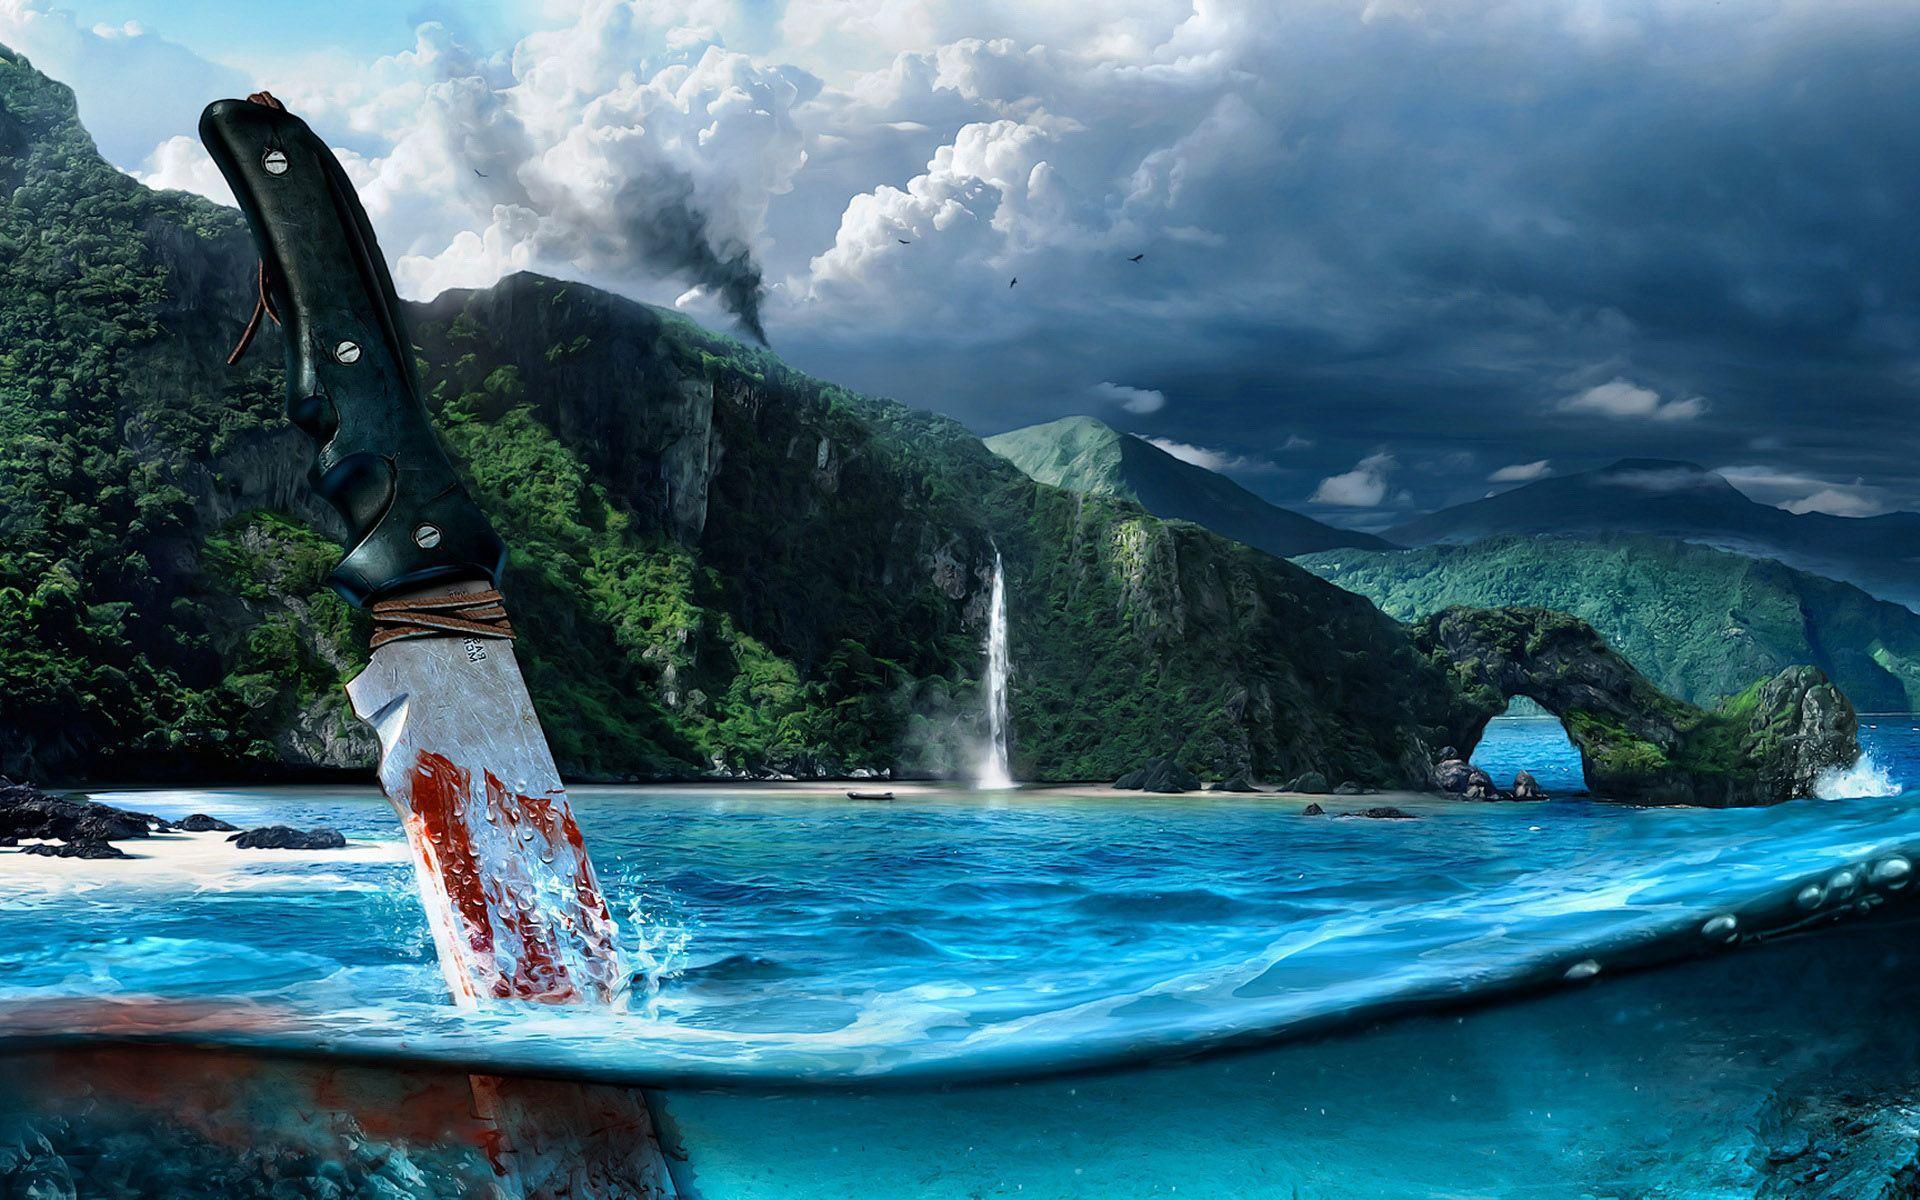 Far Cry 3 HD Wallpapers